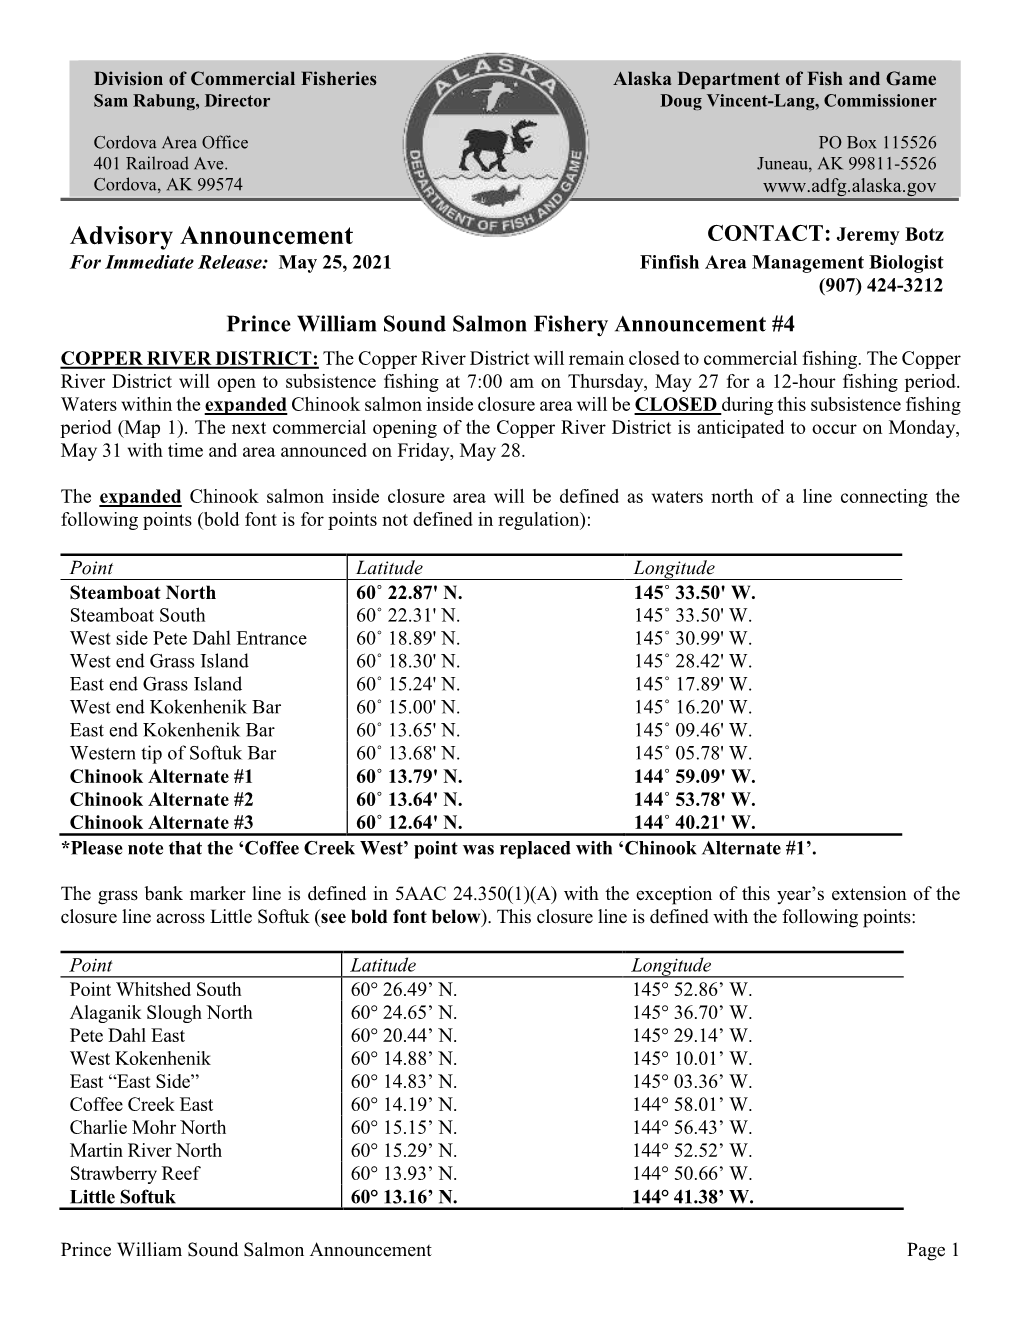 Prince William Sound Salmon Fishery Announcement #4 COPPER RIVER DISTRICT: the Copper River District Will Remain Closed to Commercial Fishing